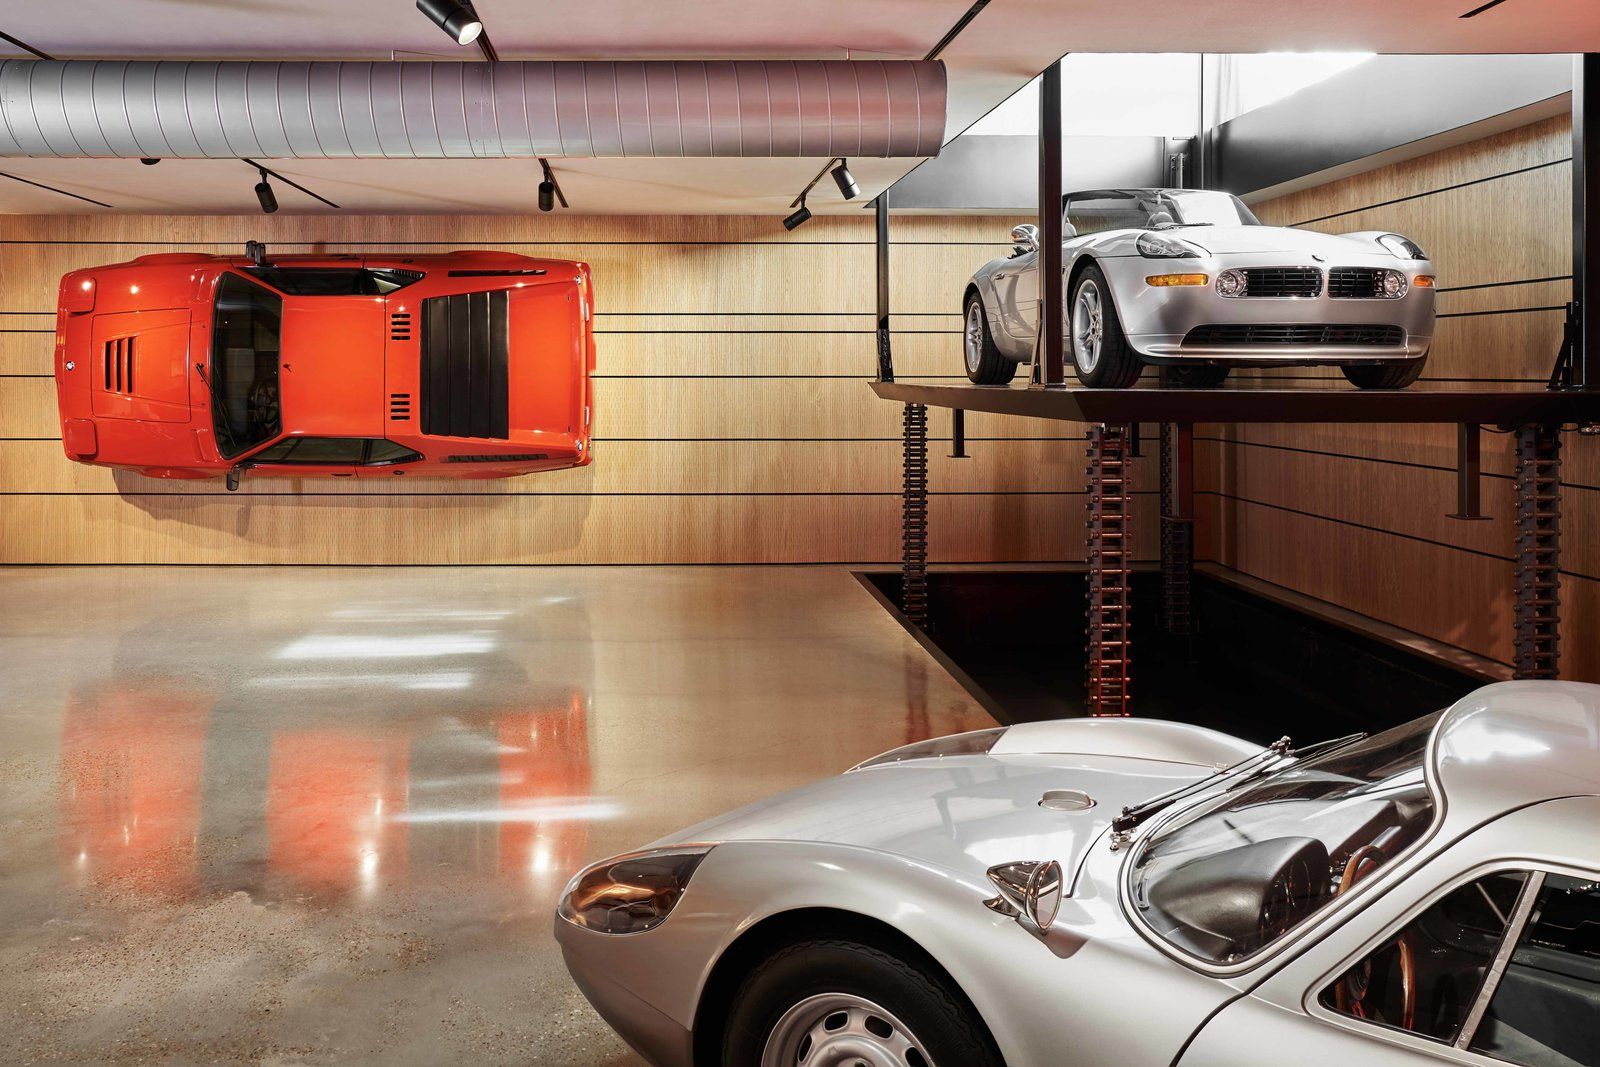 This Dream Garage Is a Four-Bay Carriage House